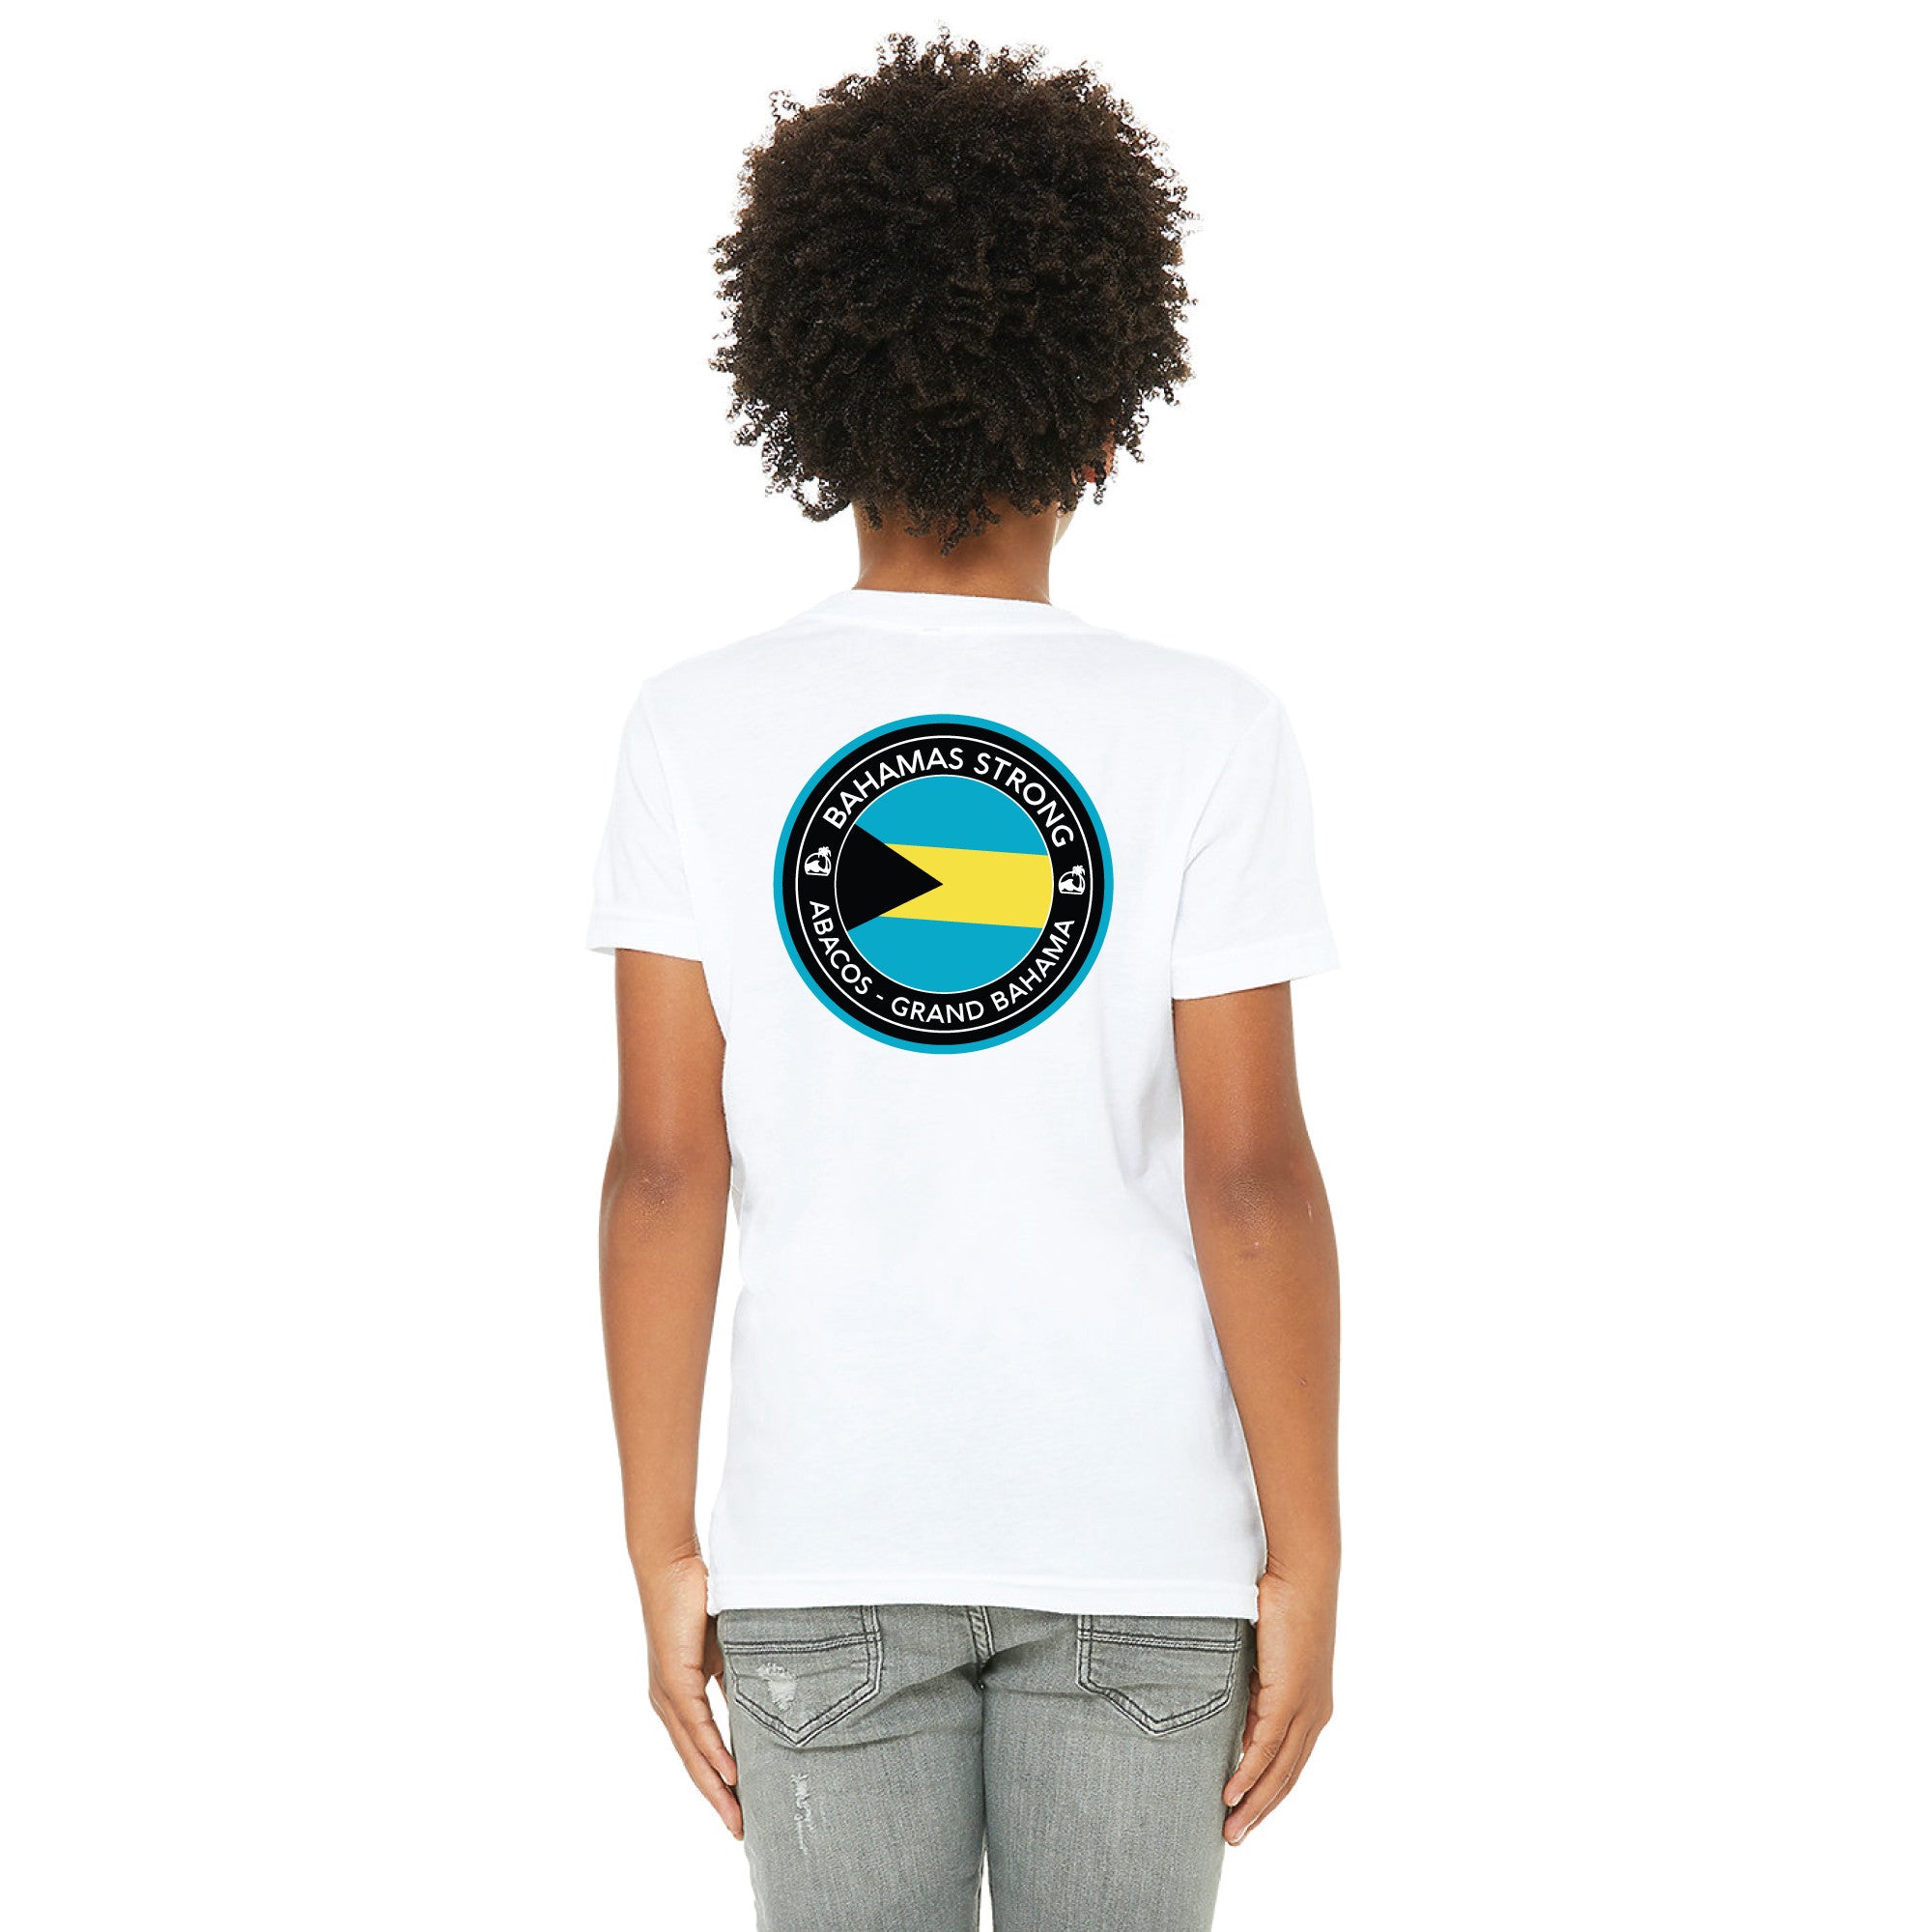 Island Water Sports Bahamas Strong Tee White S/S Youth M (10-12)